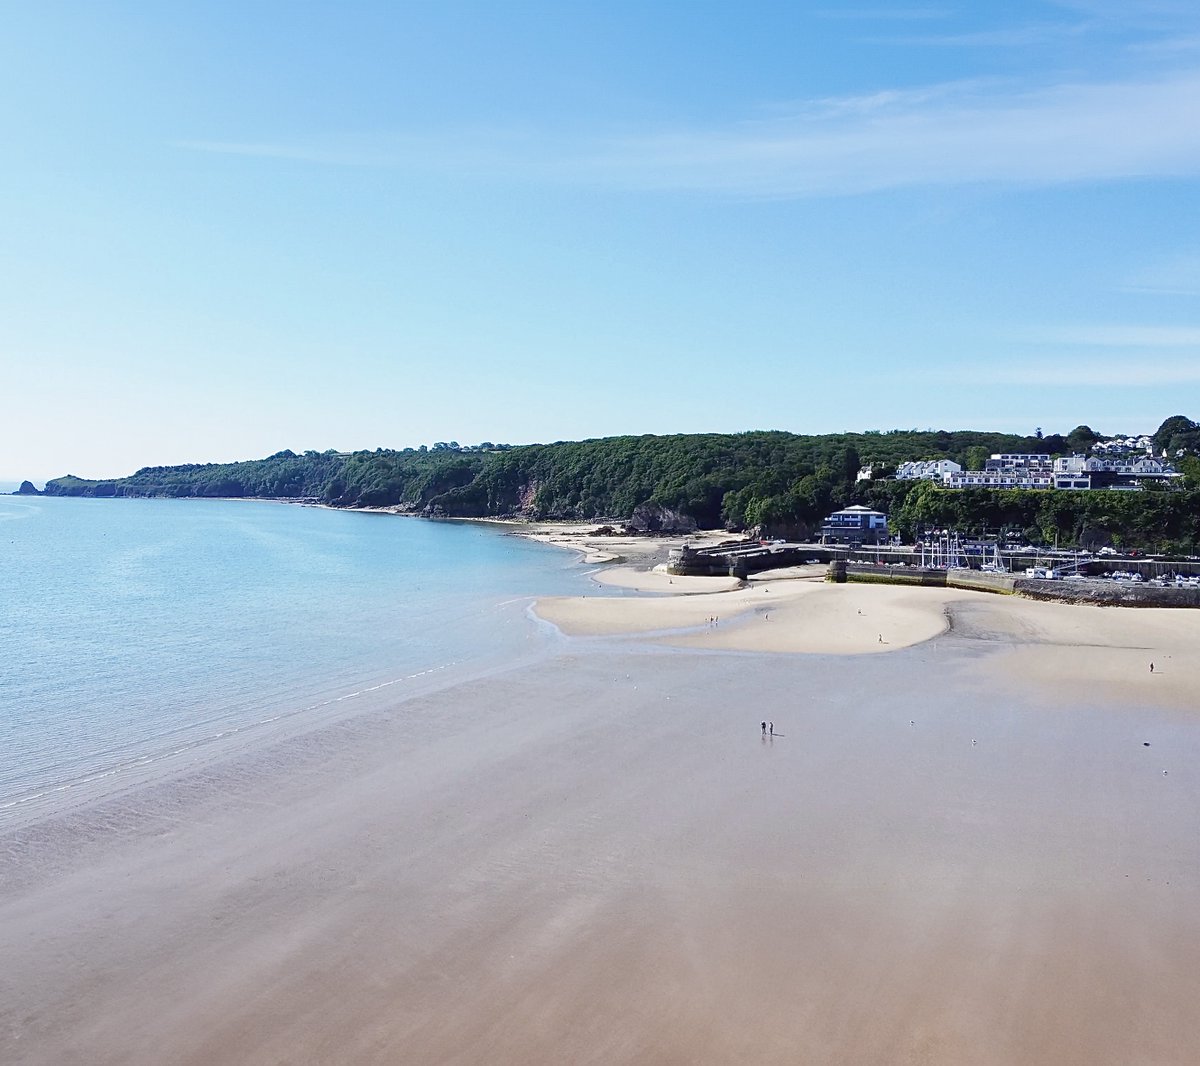 With Spring officially underway, it’s the ideal time to escape to the Pembrokeshire Coast! Enjoy the sun-filled days exploring our blue flag beaches, scenic shorelines and cliff-top coastal paths, all whilst beating the Summer crowds. Book your stay at stbridesspahotel.com